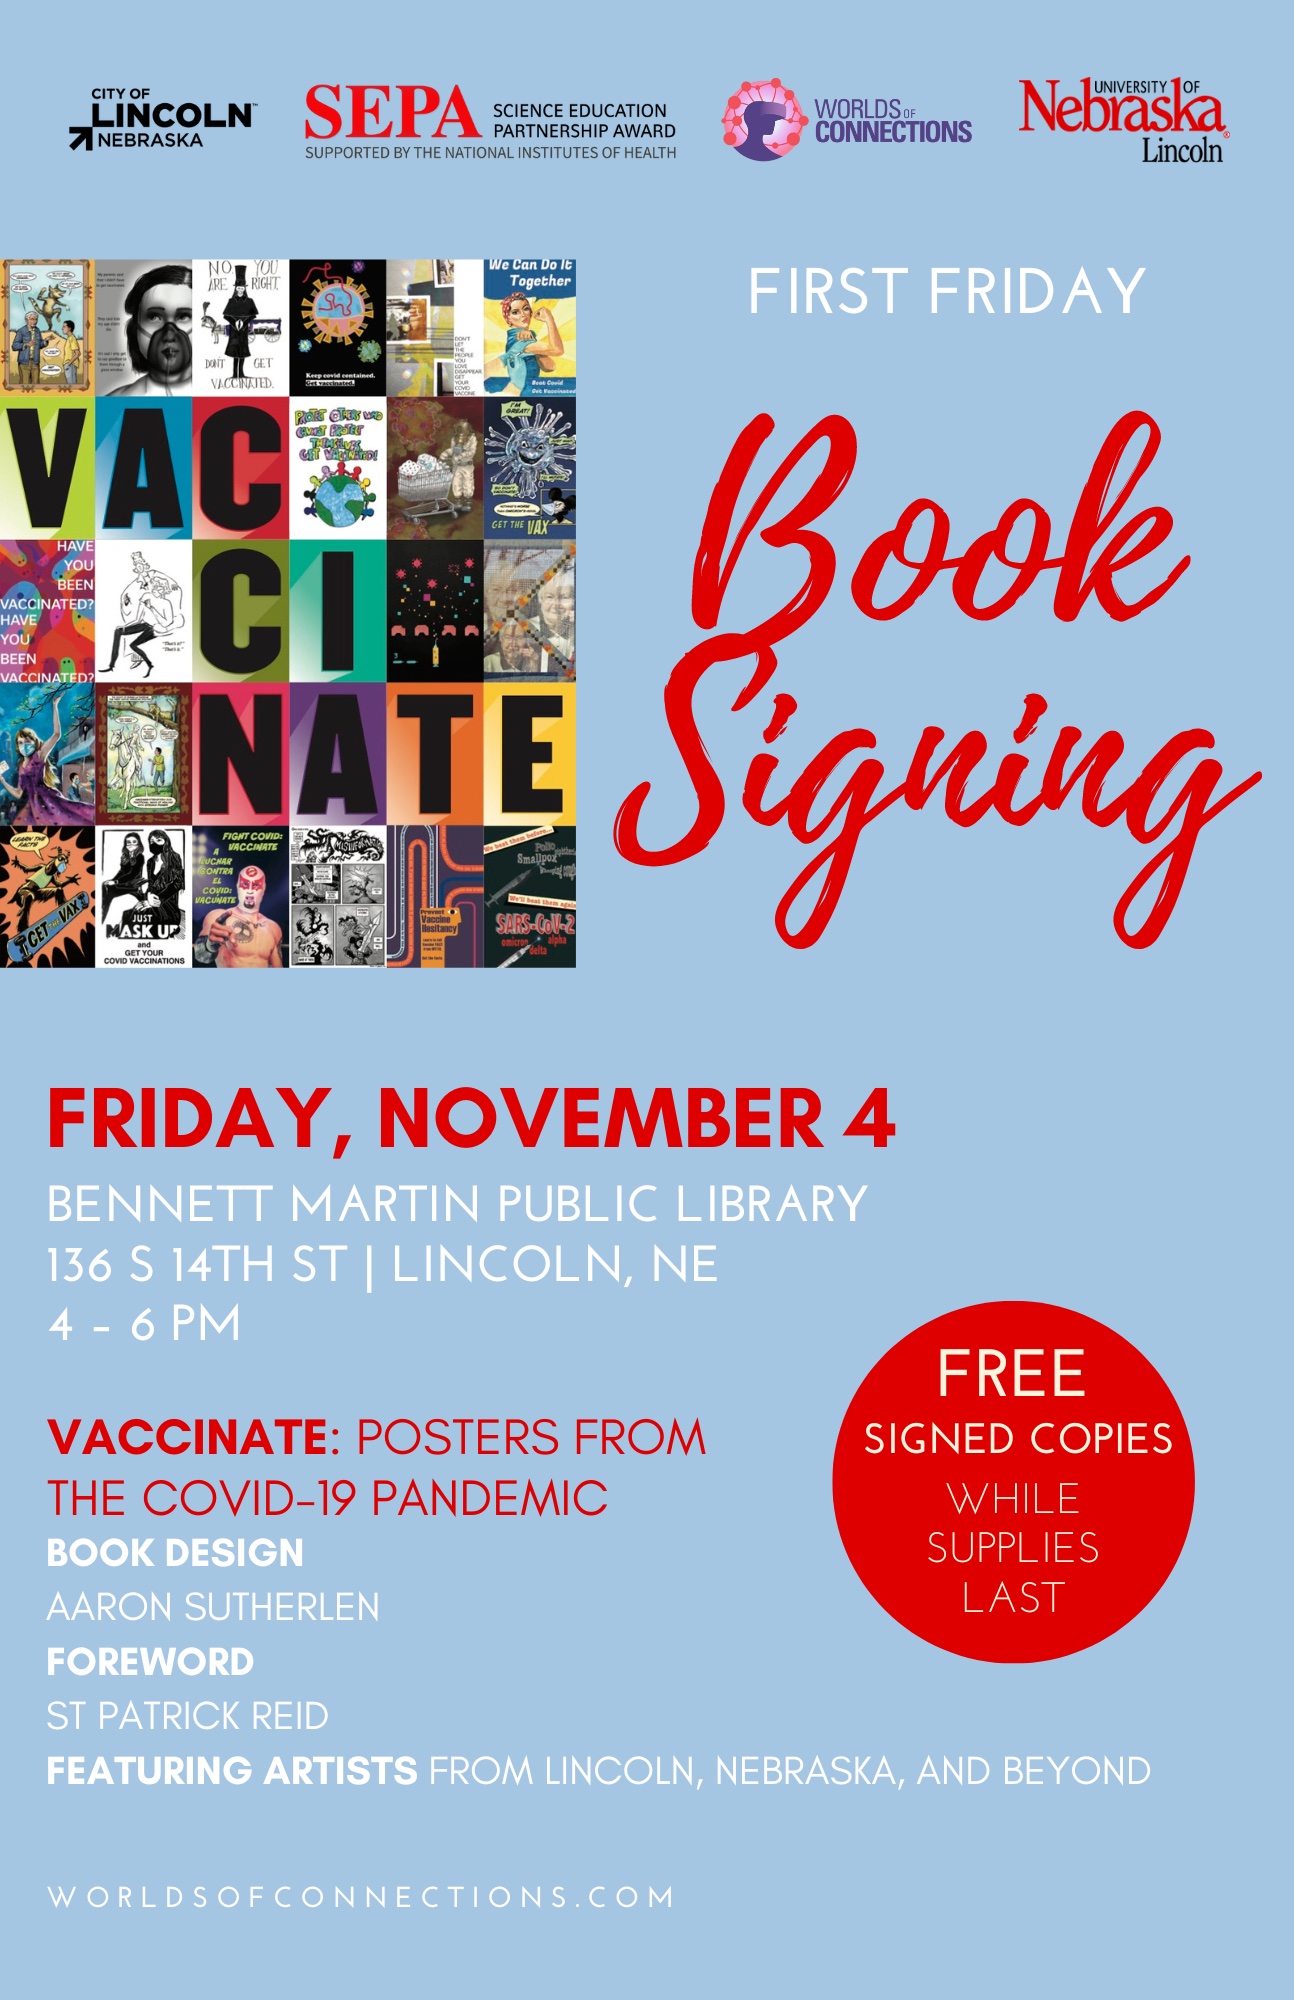 Blue background with City of Lincoln, Nebraska; National Institutes of Health Science Education Partnership Award; Worlds of Connections; and University of Nebraska–Lincoln logos across the top. The Vaccinate book cover, made of colorful tiled letters and artworks, is flush left. To the right, “FIRST FRIDAY Book Signing” in white and scarlet lettering. Date: “FRIDAY, NOVEMBER” in scarlet block lettering. Below the date are the location, address, and time in white block lettering. Location: “BENNET MARTIN PUBLIC LIBRARY” Address: “136 S 14TH ST | LINCOLN, NE” Time: “4 – 6 PM.” Below, in scarlet lettering, the book title: “VACCINATE: POSTERS FROM THE COVID PANDEMIC.” In white block lettering, the book credits, on separate lines: “BOOK DESIGN: AARON SUTHERLEN,” “FOREWORD: ST PATRICK REID,” “FEATURING ARTISTS FROM LINCOLN, NEBRASKA, AND BEYOND.” To the right of the location and book information, scarlet circle with white text reads, “FREE SIGNED COPIES WHILE SUPPLIES LAST.”